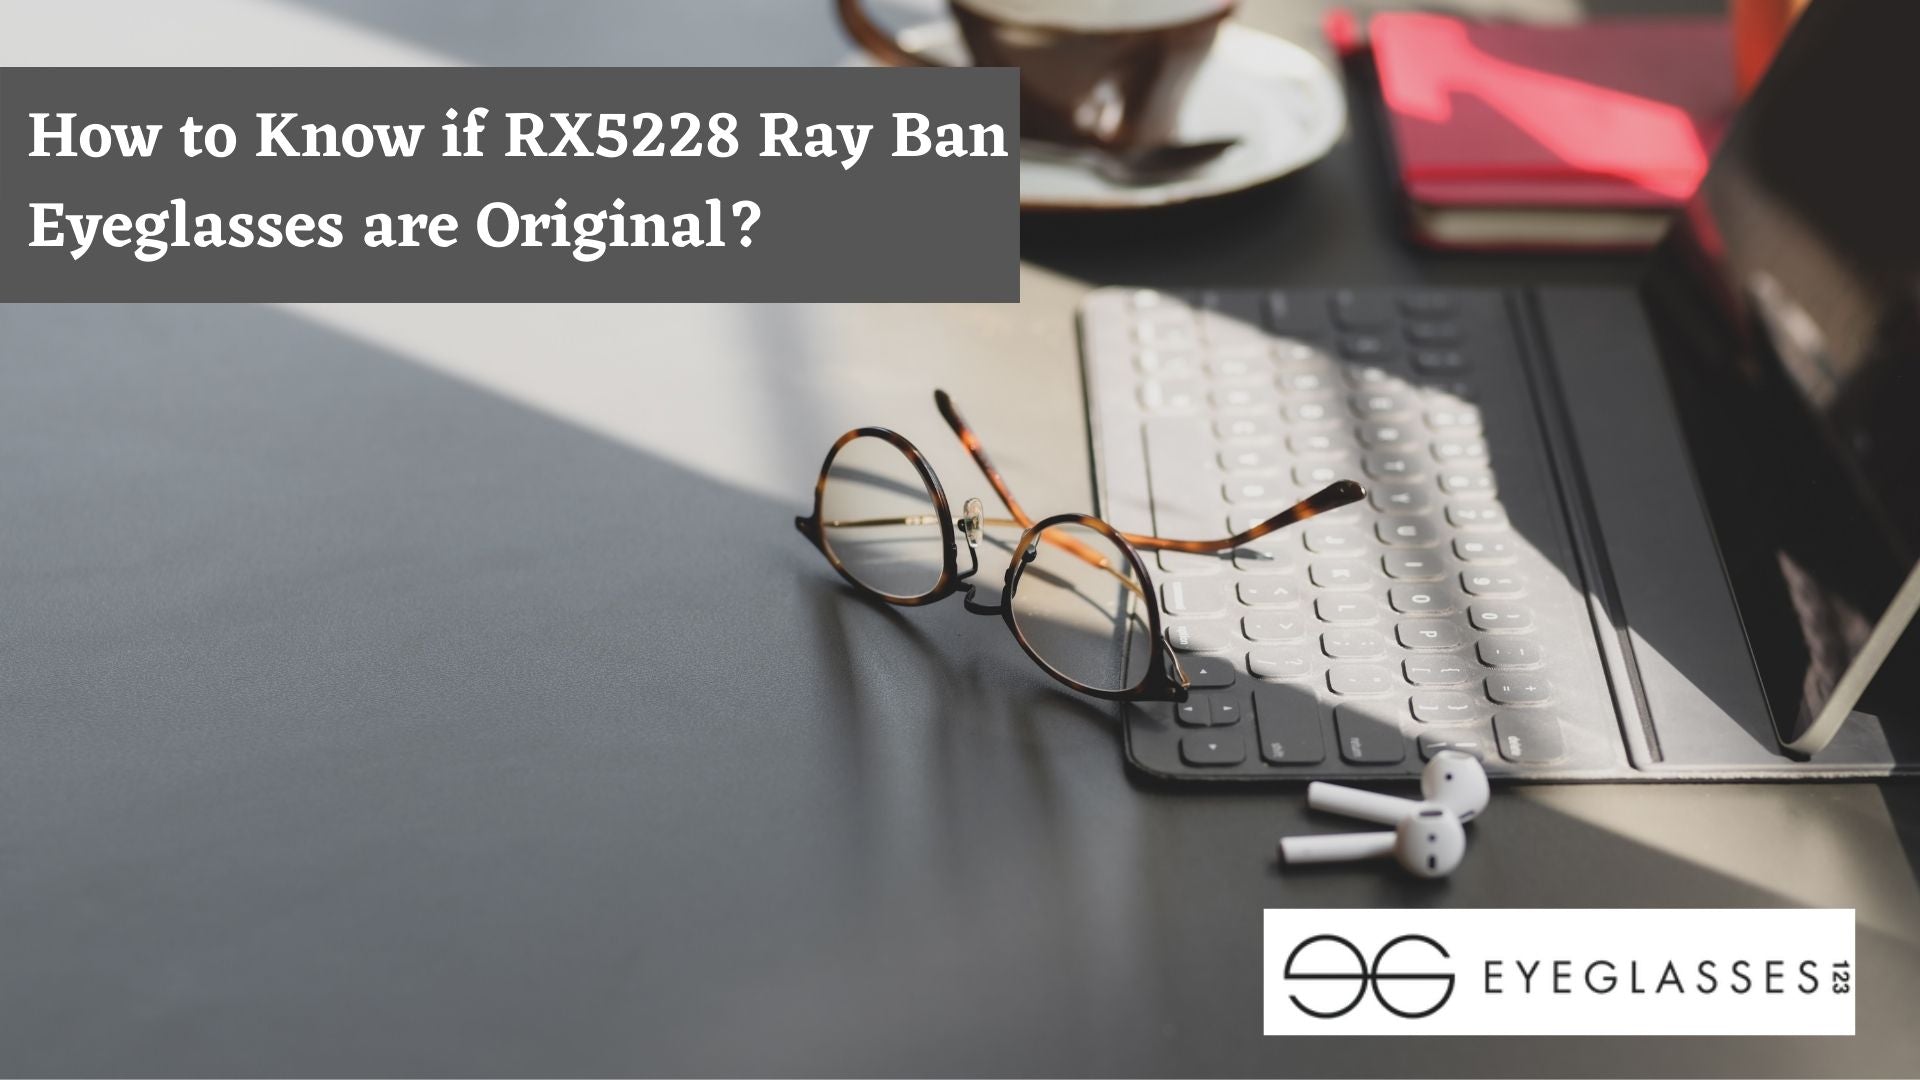 How to Know if RX5228 Ray Ban Eyeglasses are Original?